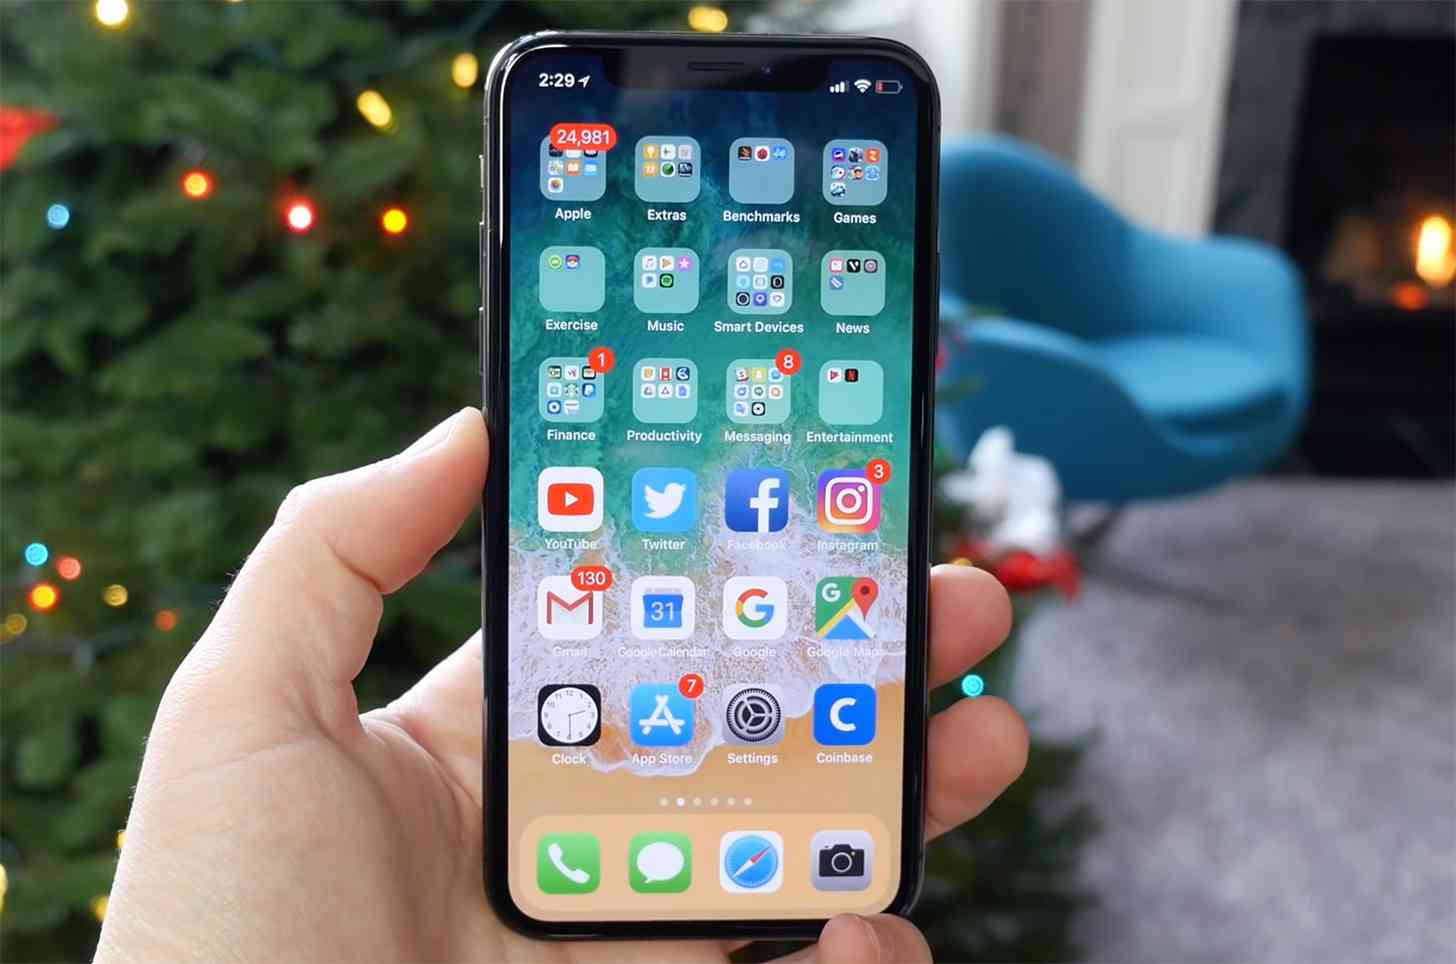 iPhone X hands-on video